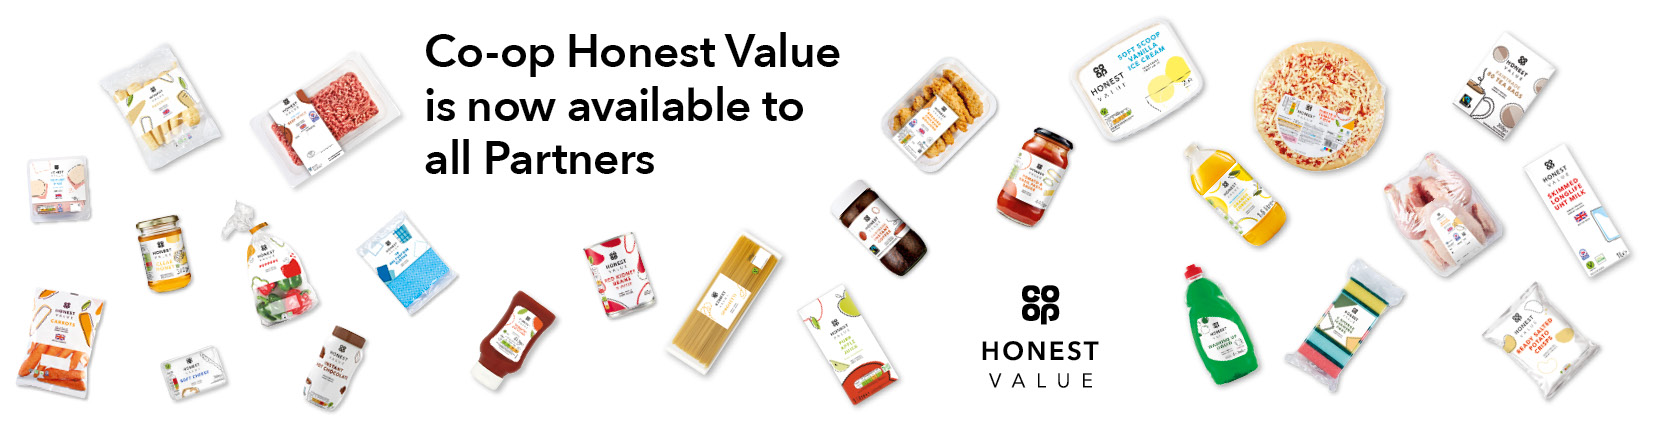 Nisa rolls out Co-op’s Honest Value range to all retailers